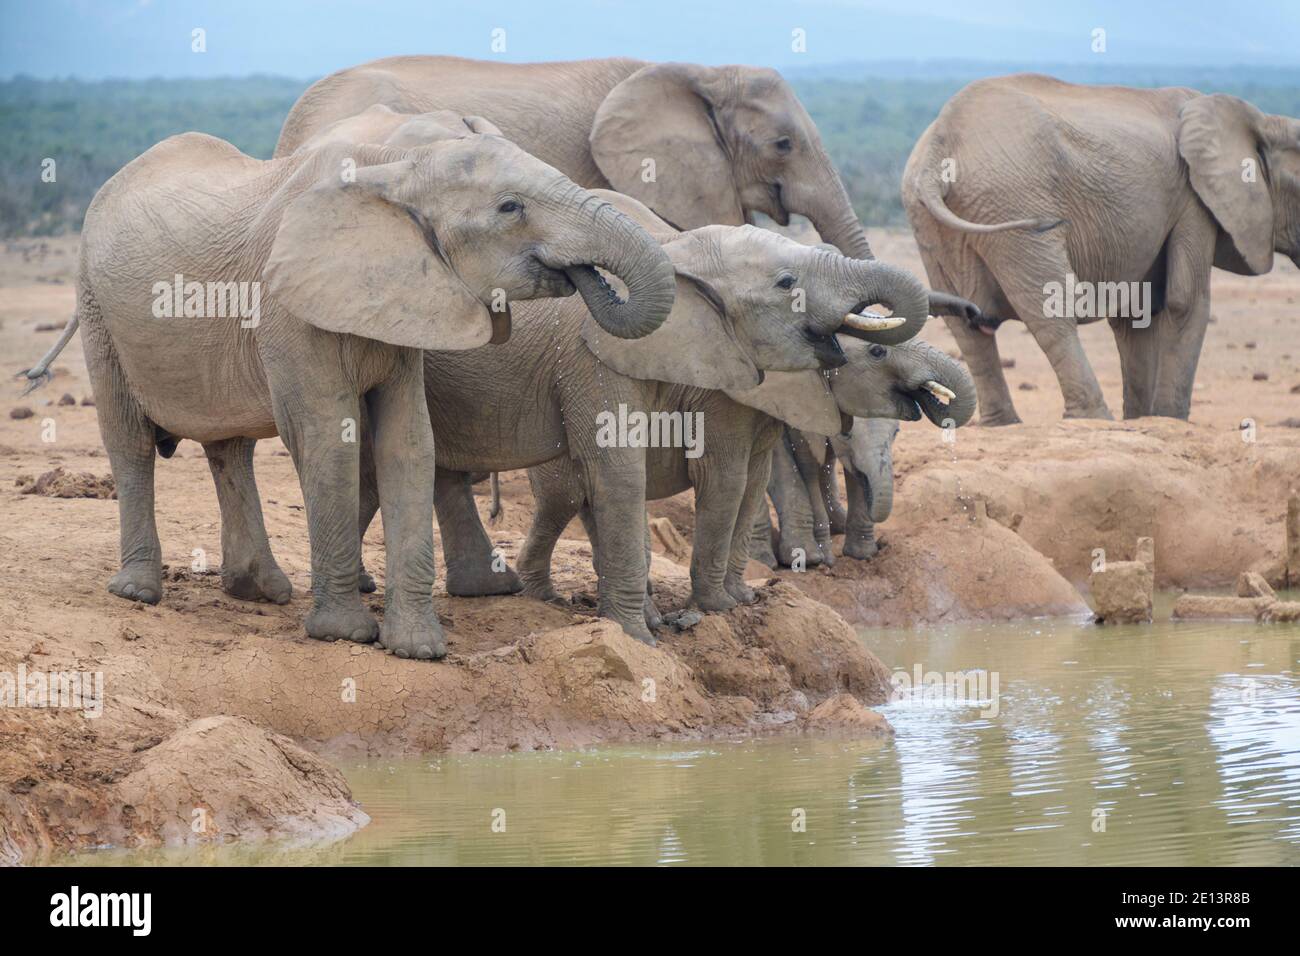 African elephant (Loxodonta africana) herd with young calves drinking at waterhole, Addo Elephant National Park, Eastern Cape, South Africa. Stock Photo